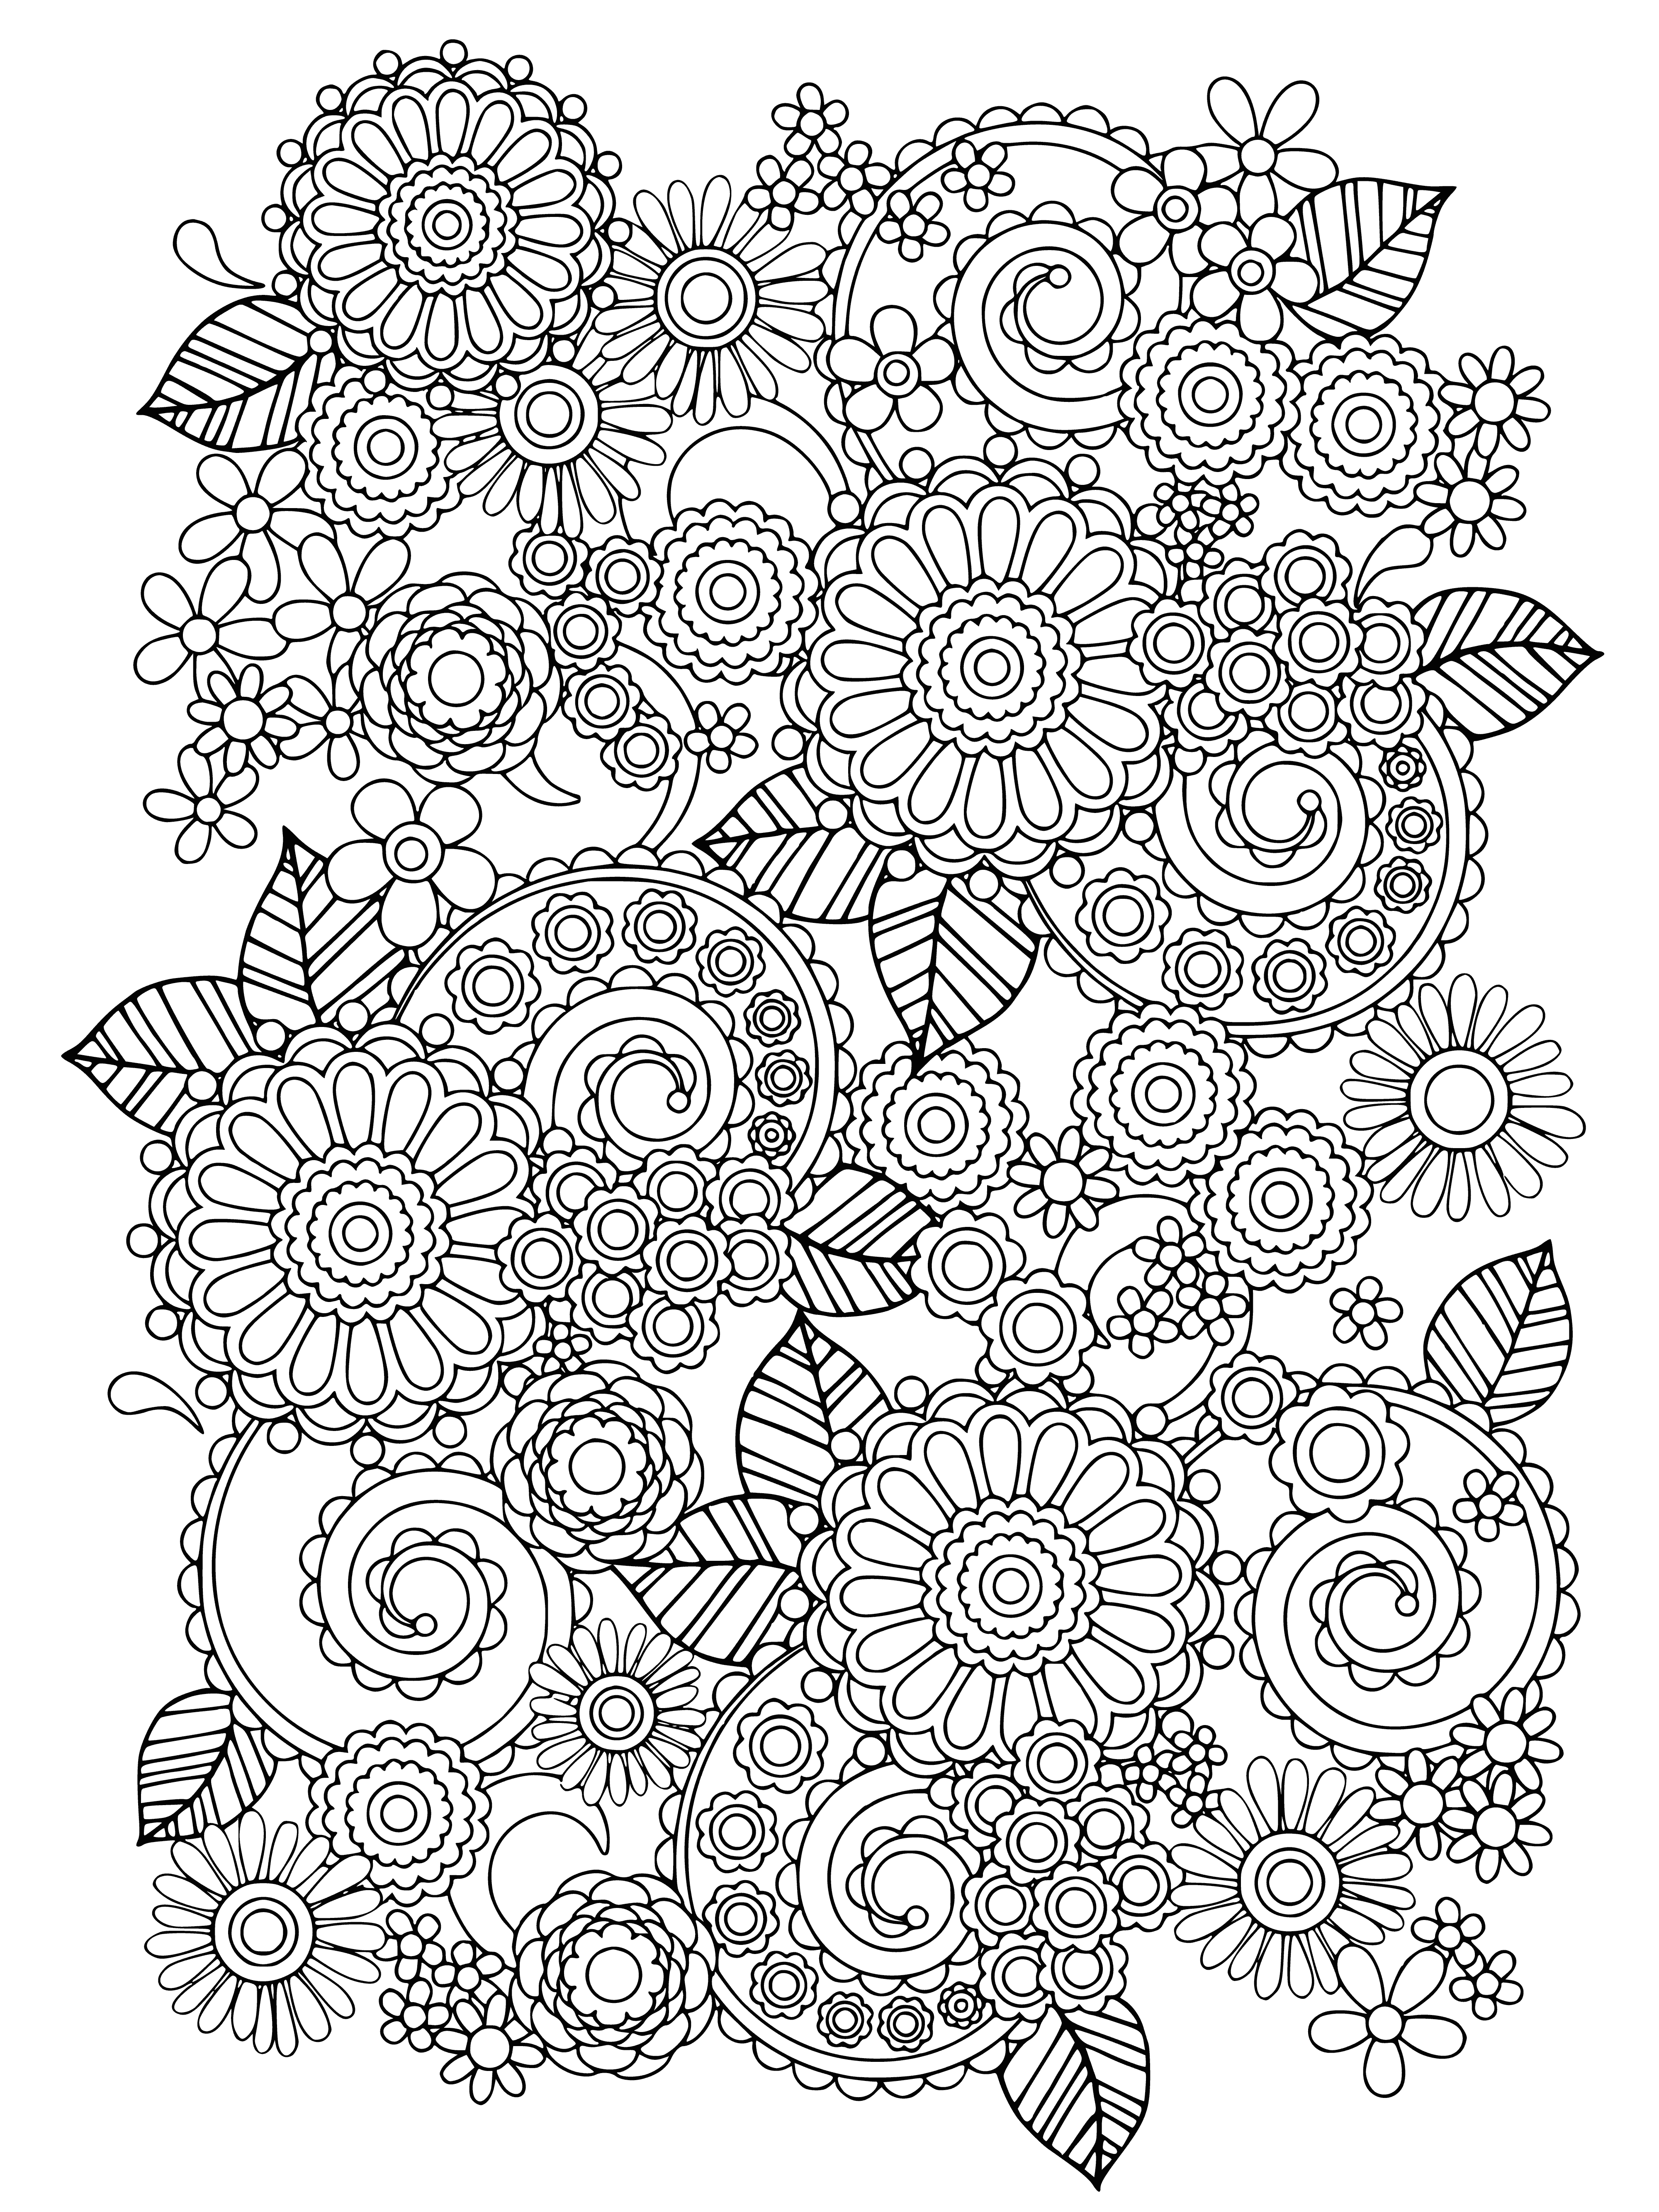 coloring page: Adult coloring pages featuring flowers - all different colors, multi-colored petals, and leaves. A beautiful way to relax! #coloring